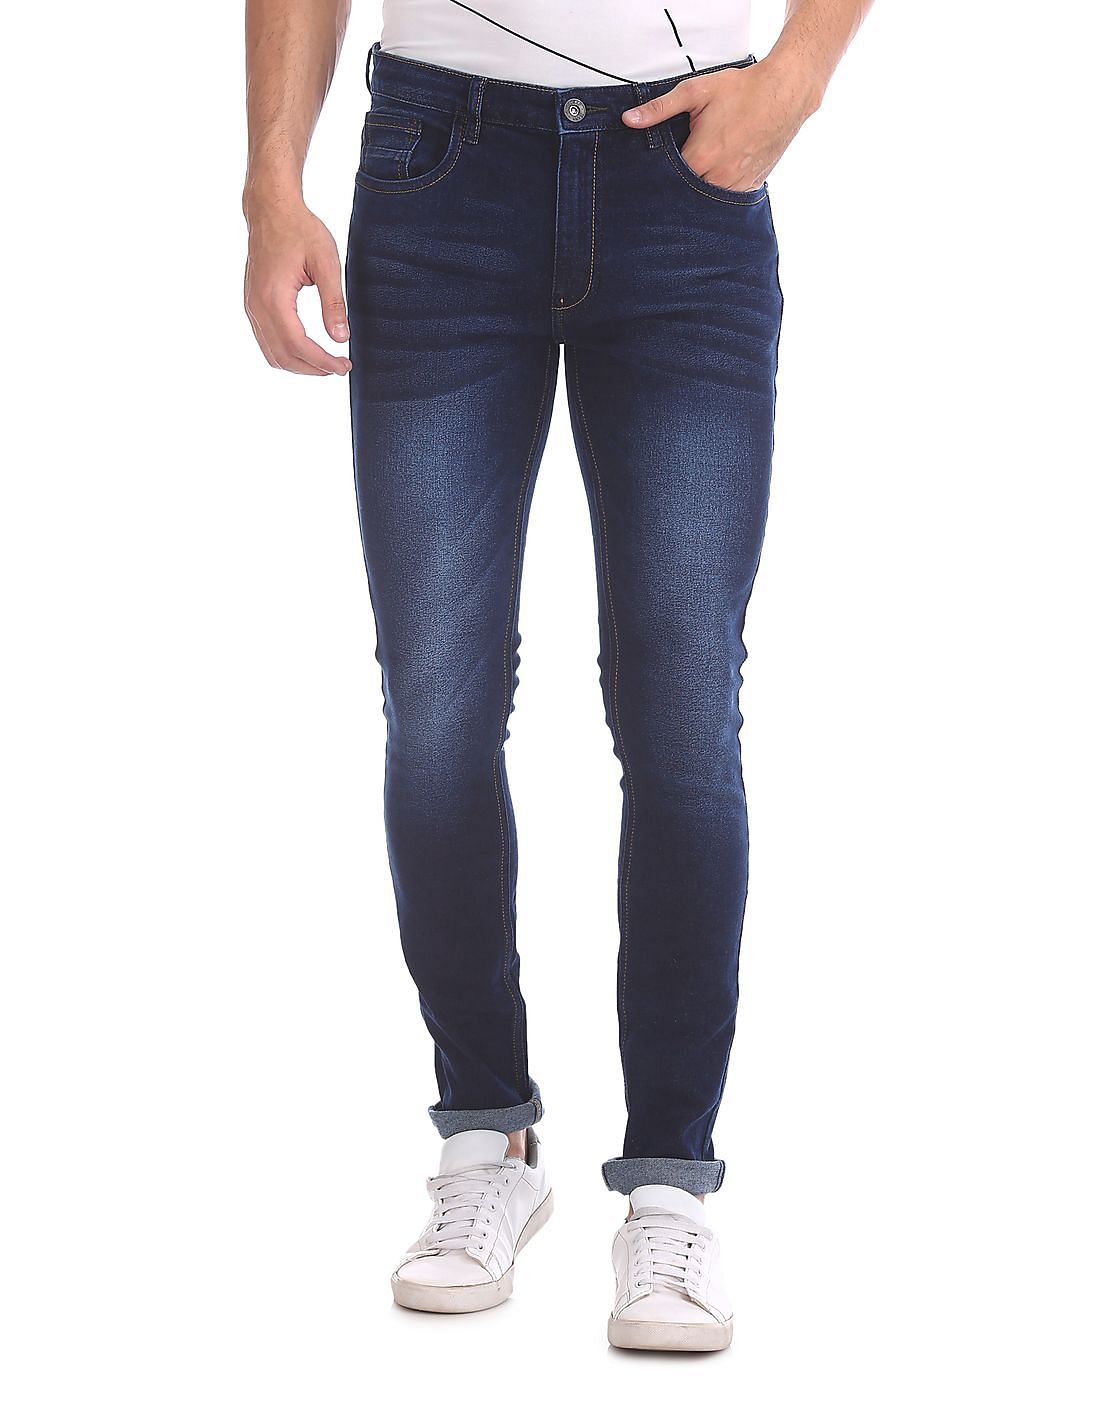 Flat 60-70% Off on Men’s Jeans Starts from Rs. 240